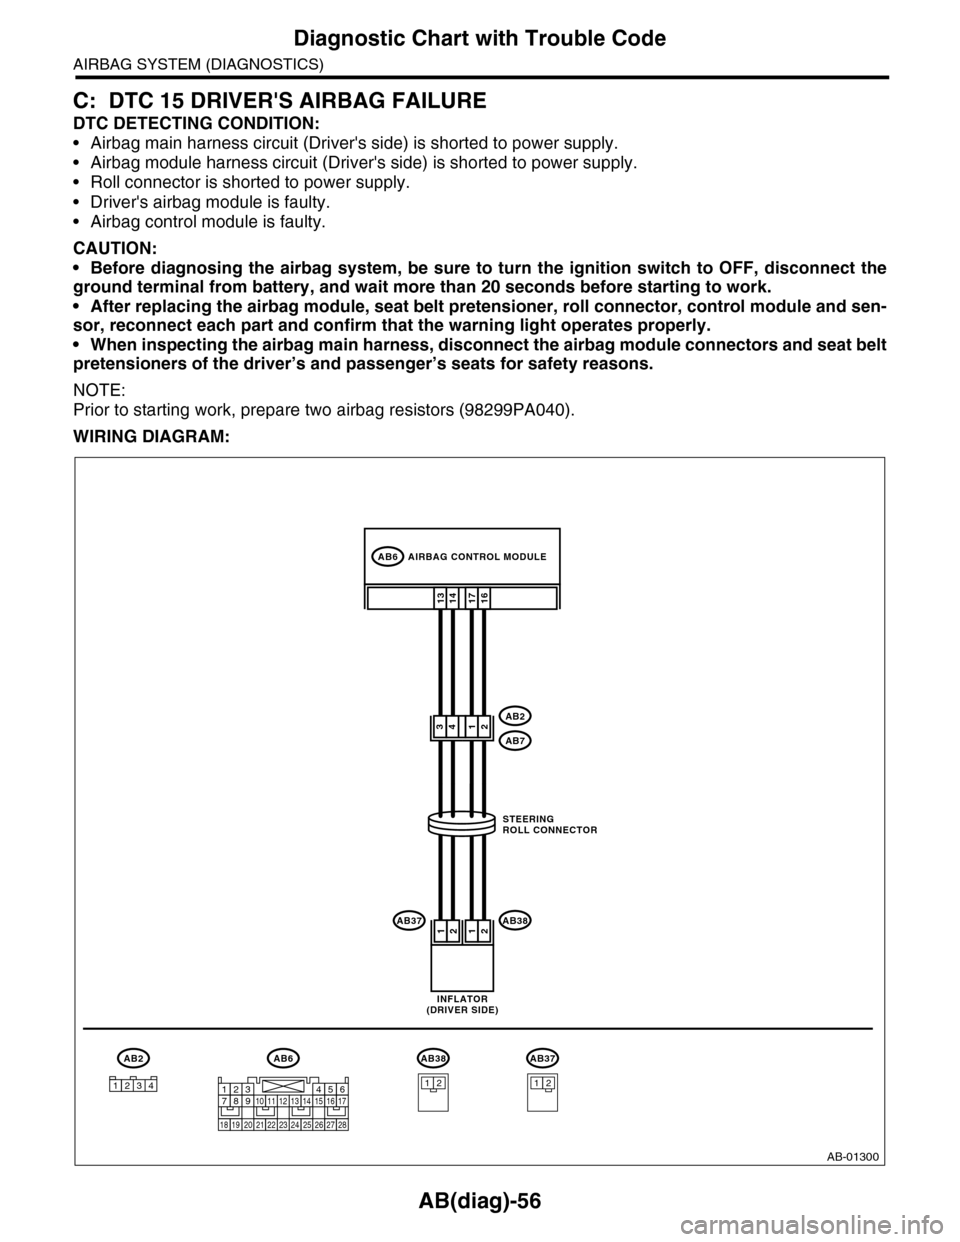 SUBARU TRIBECA 2009 1.G Service Workshop Manual AB(diag)-56
Diagnostic Chart with Trouble Code
AIRBAG SYSTEM (DIAGNOSTICS)
C: DTC 15 DRIVERS AIRBAG FAILURE
DTC DETECTING CONDITION:
•Airbag main harness circuit (Drivers side) is shorted to power